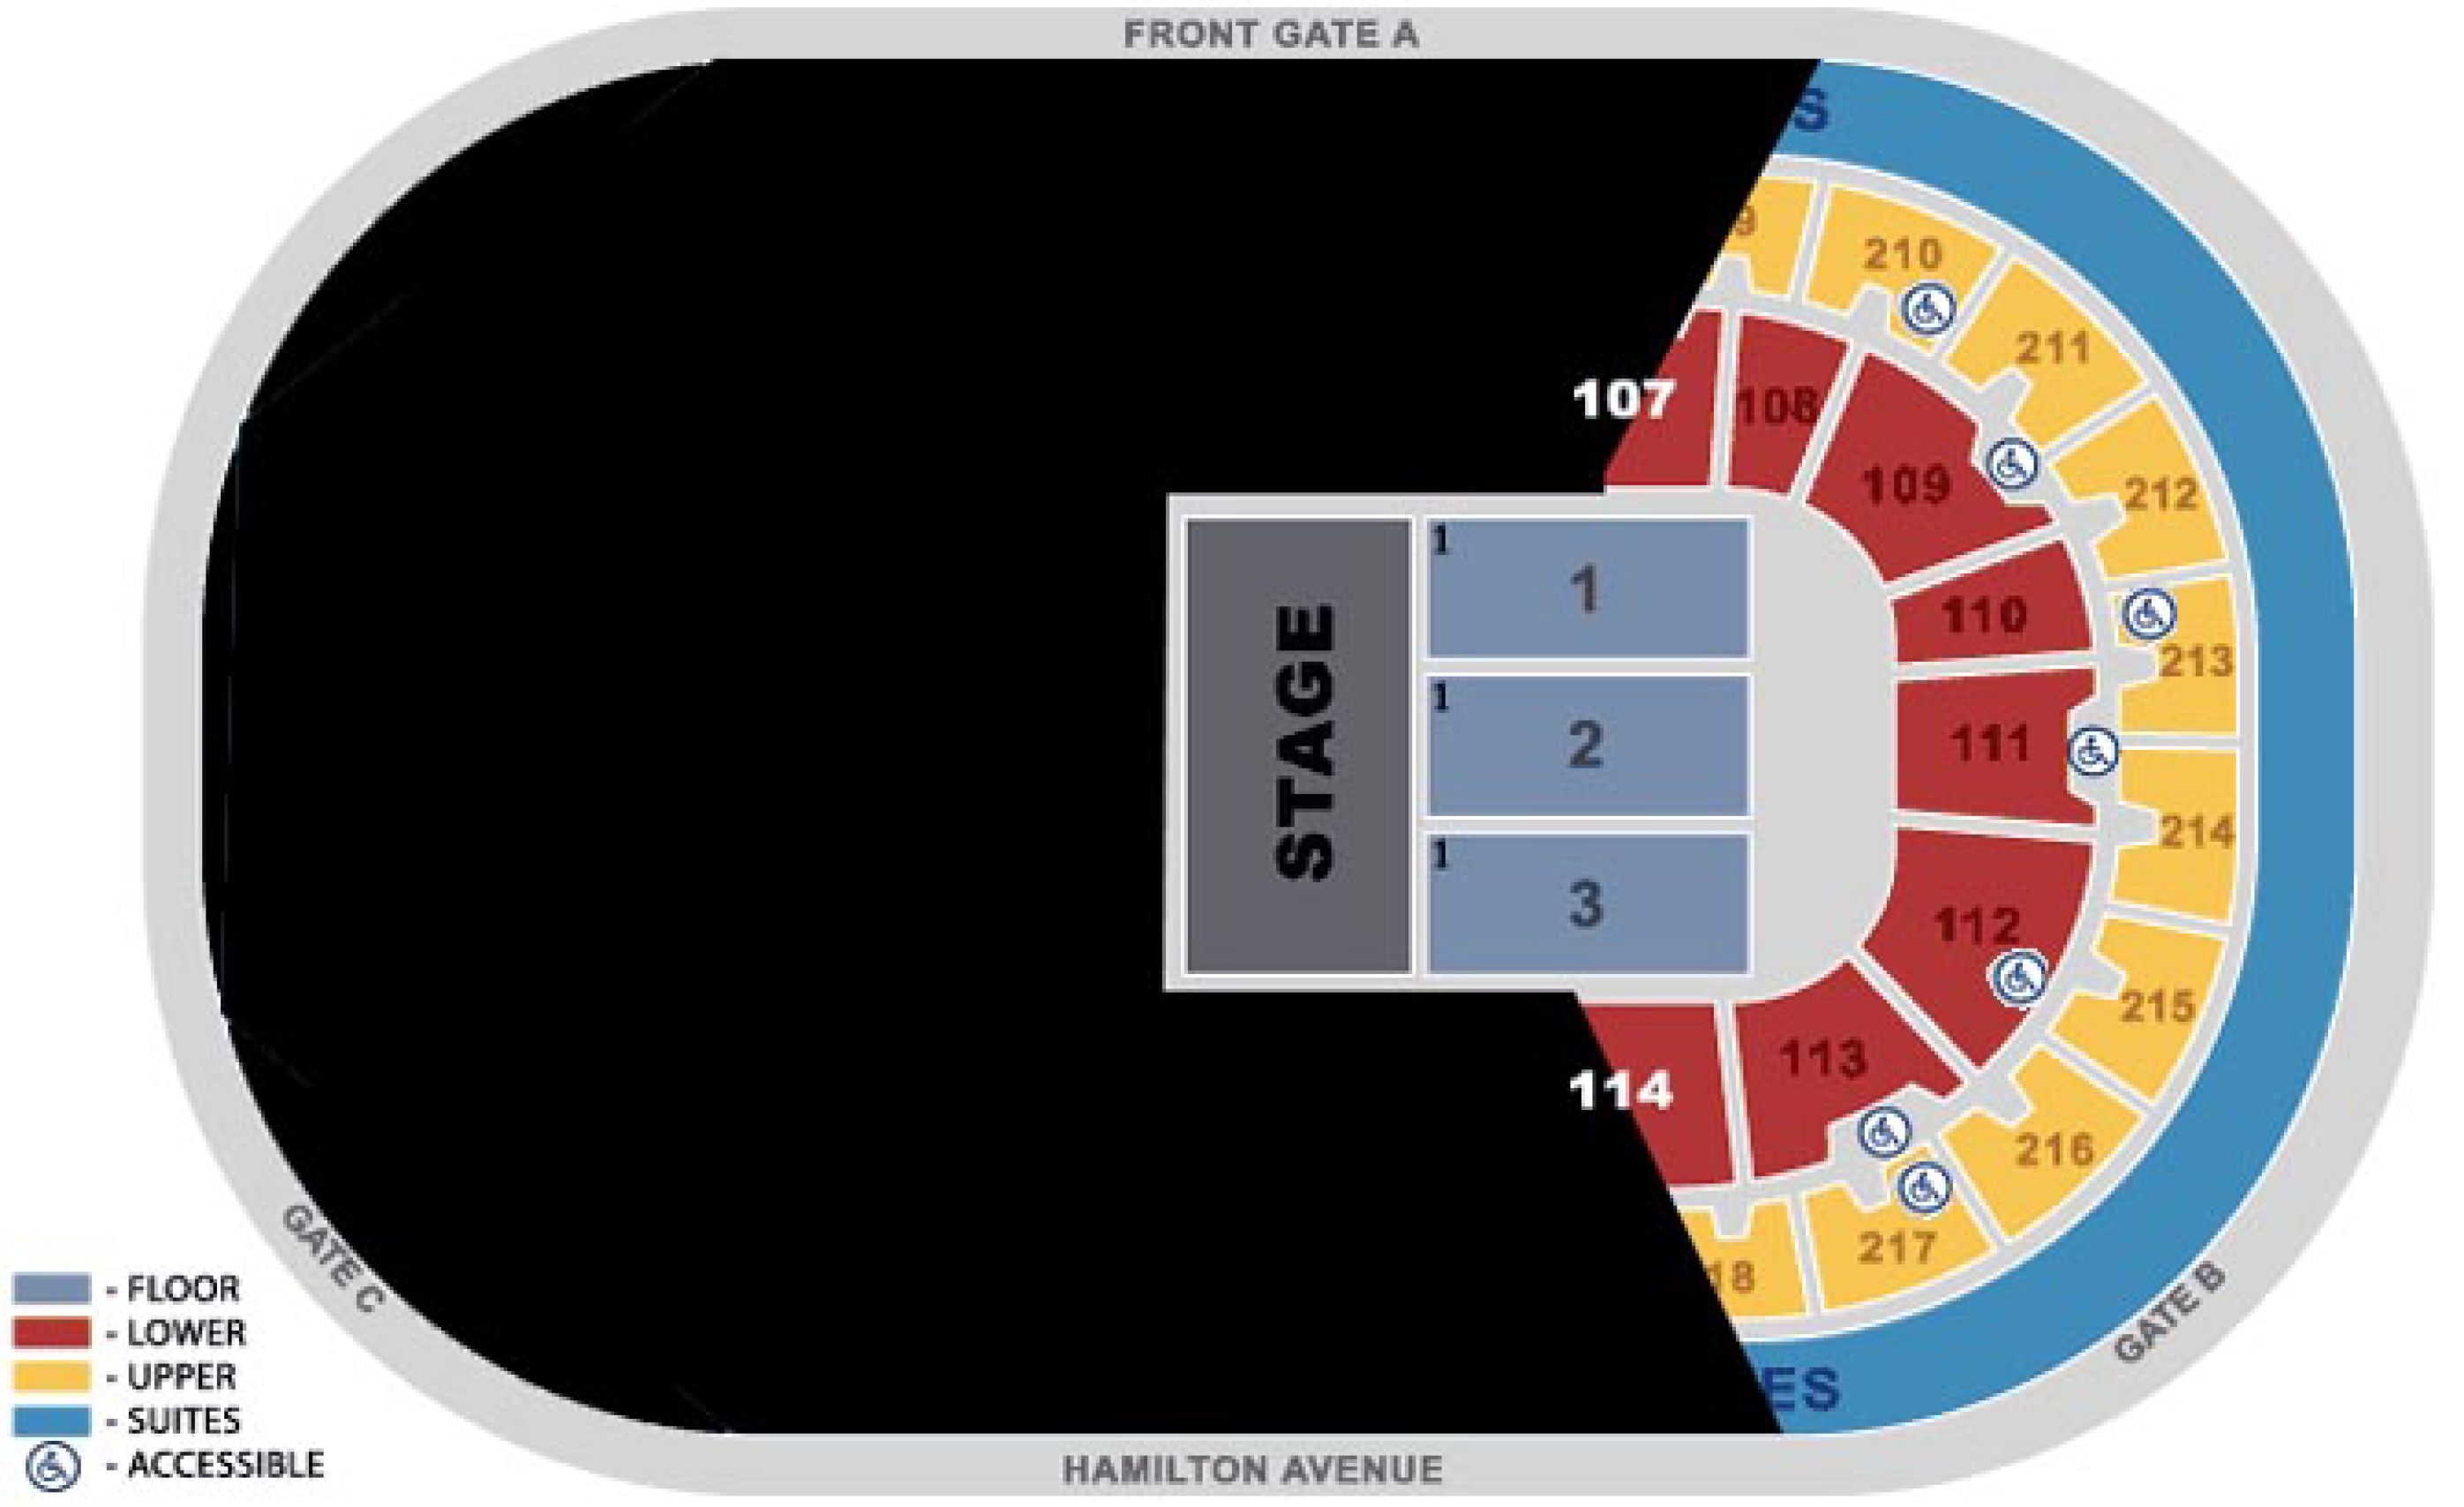 CURE Arena Seating Plan Limited Concert